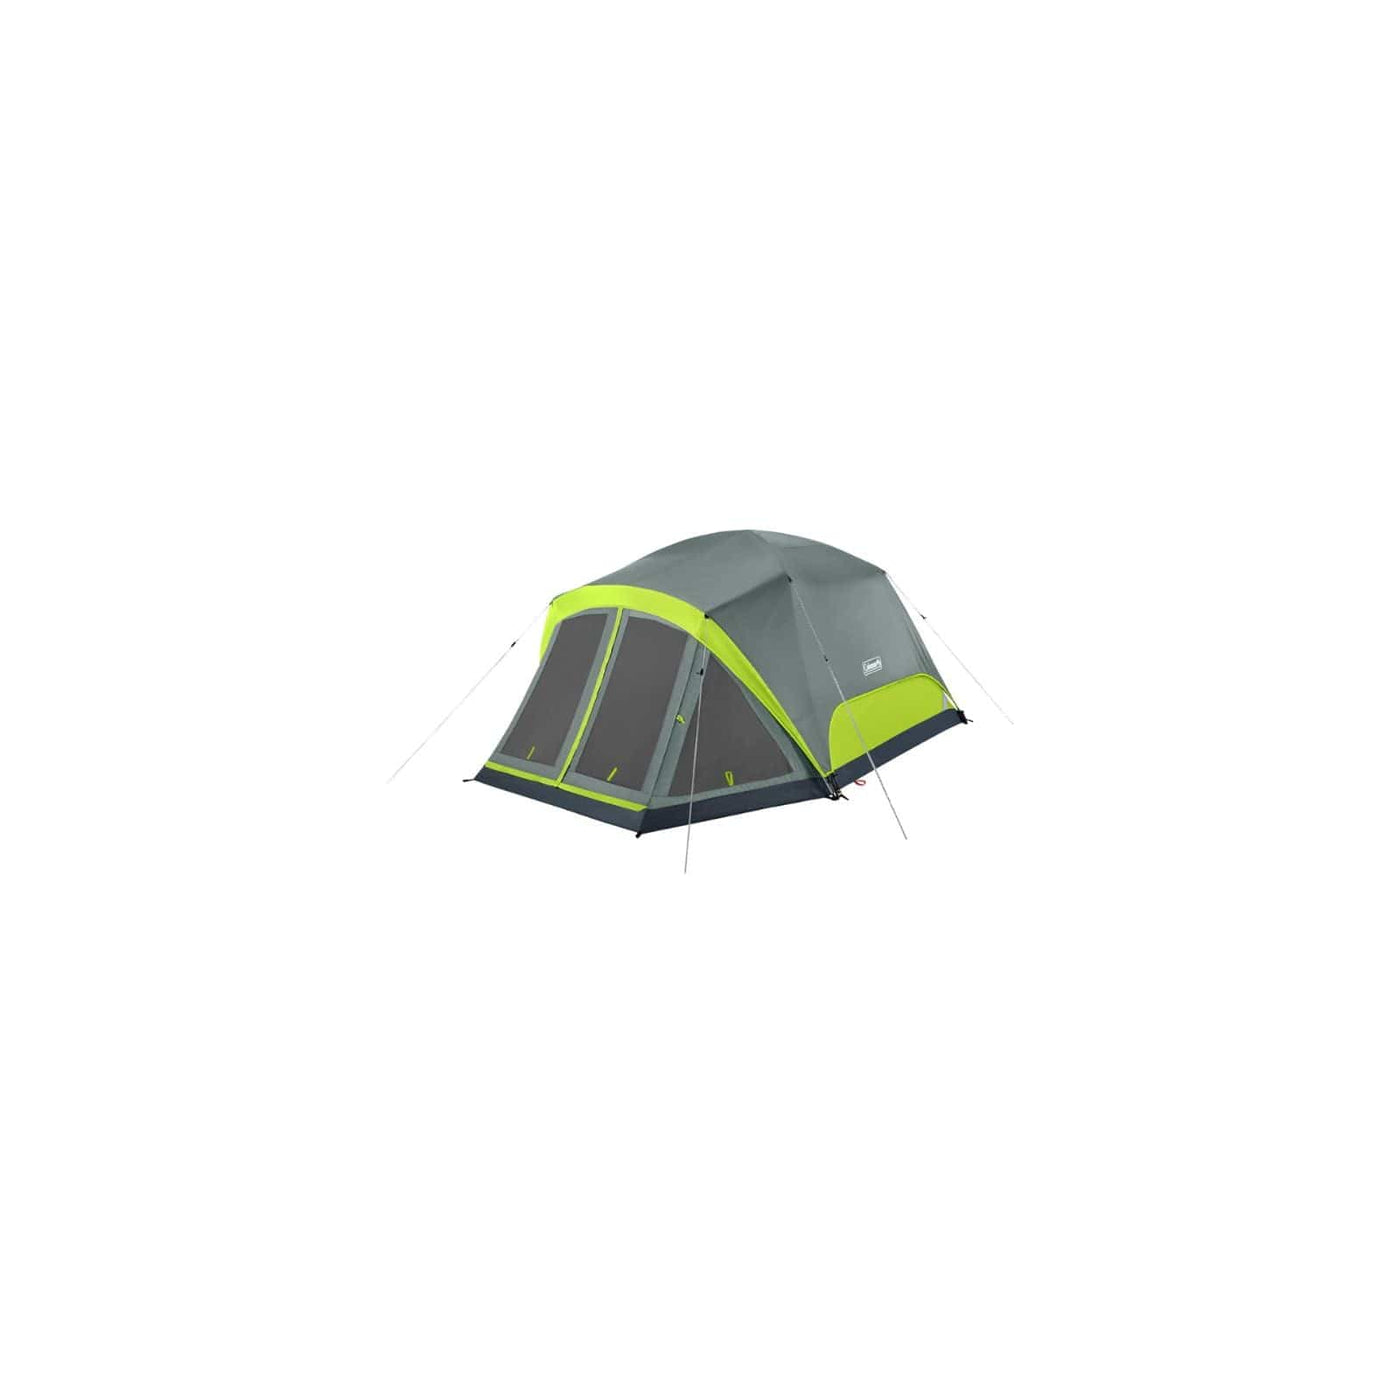 Coleman Coleman Skydome Tent 4P Scrn Rm Rockgrey C001 Camping And Outdoor